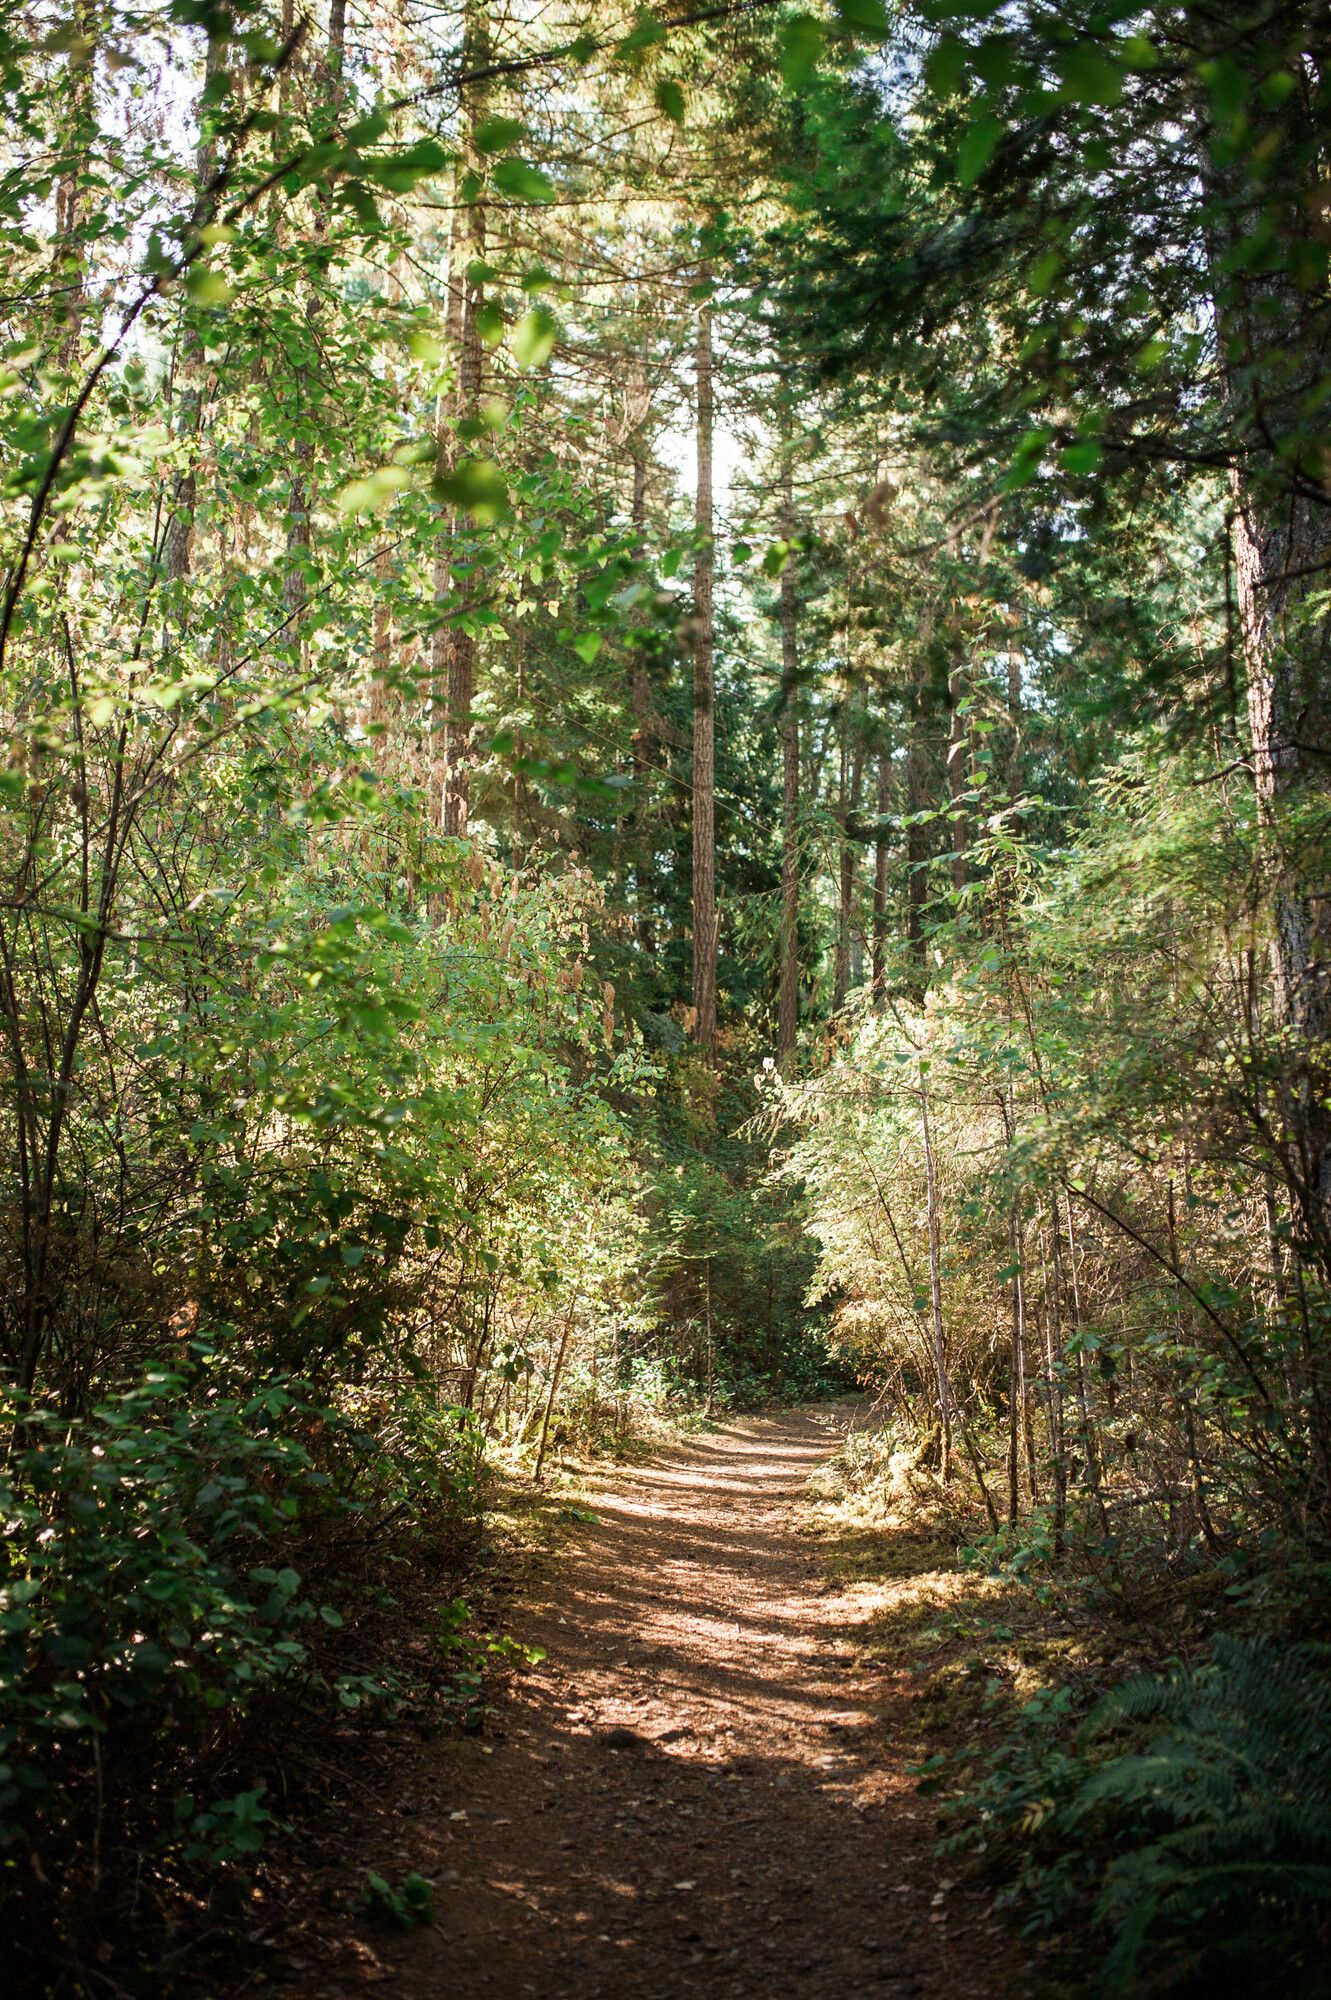 A forest trail in Boyle Point Park.